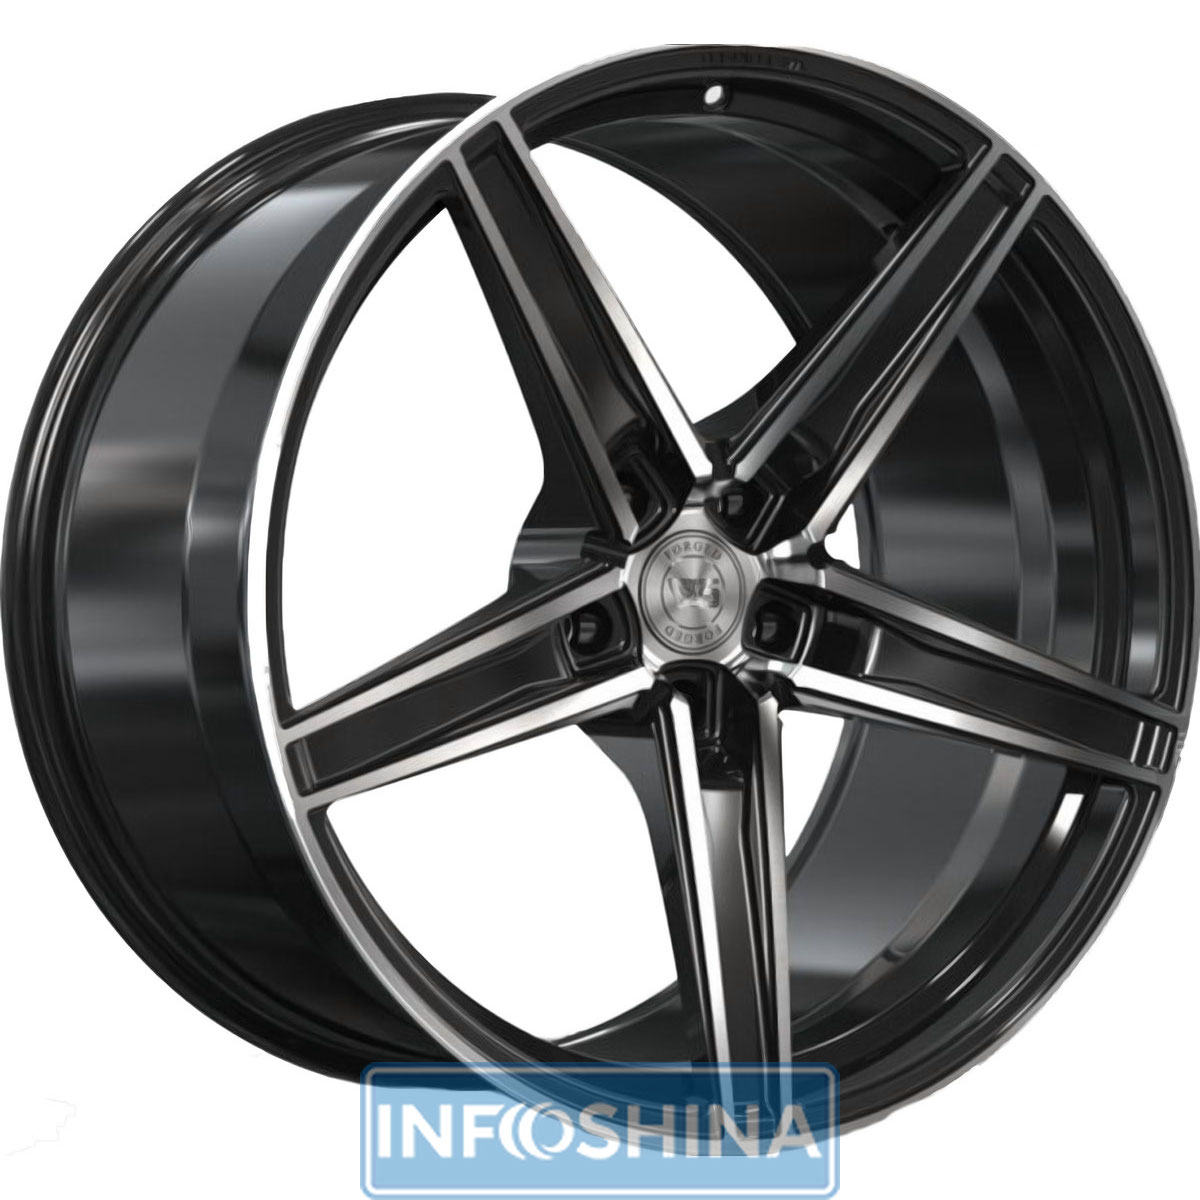 Купить диски WS Forged WS2115 Gloss Black With Machined Face R21 W10.5 PCD5x120 ET33 DIA74.1